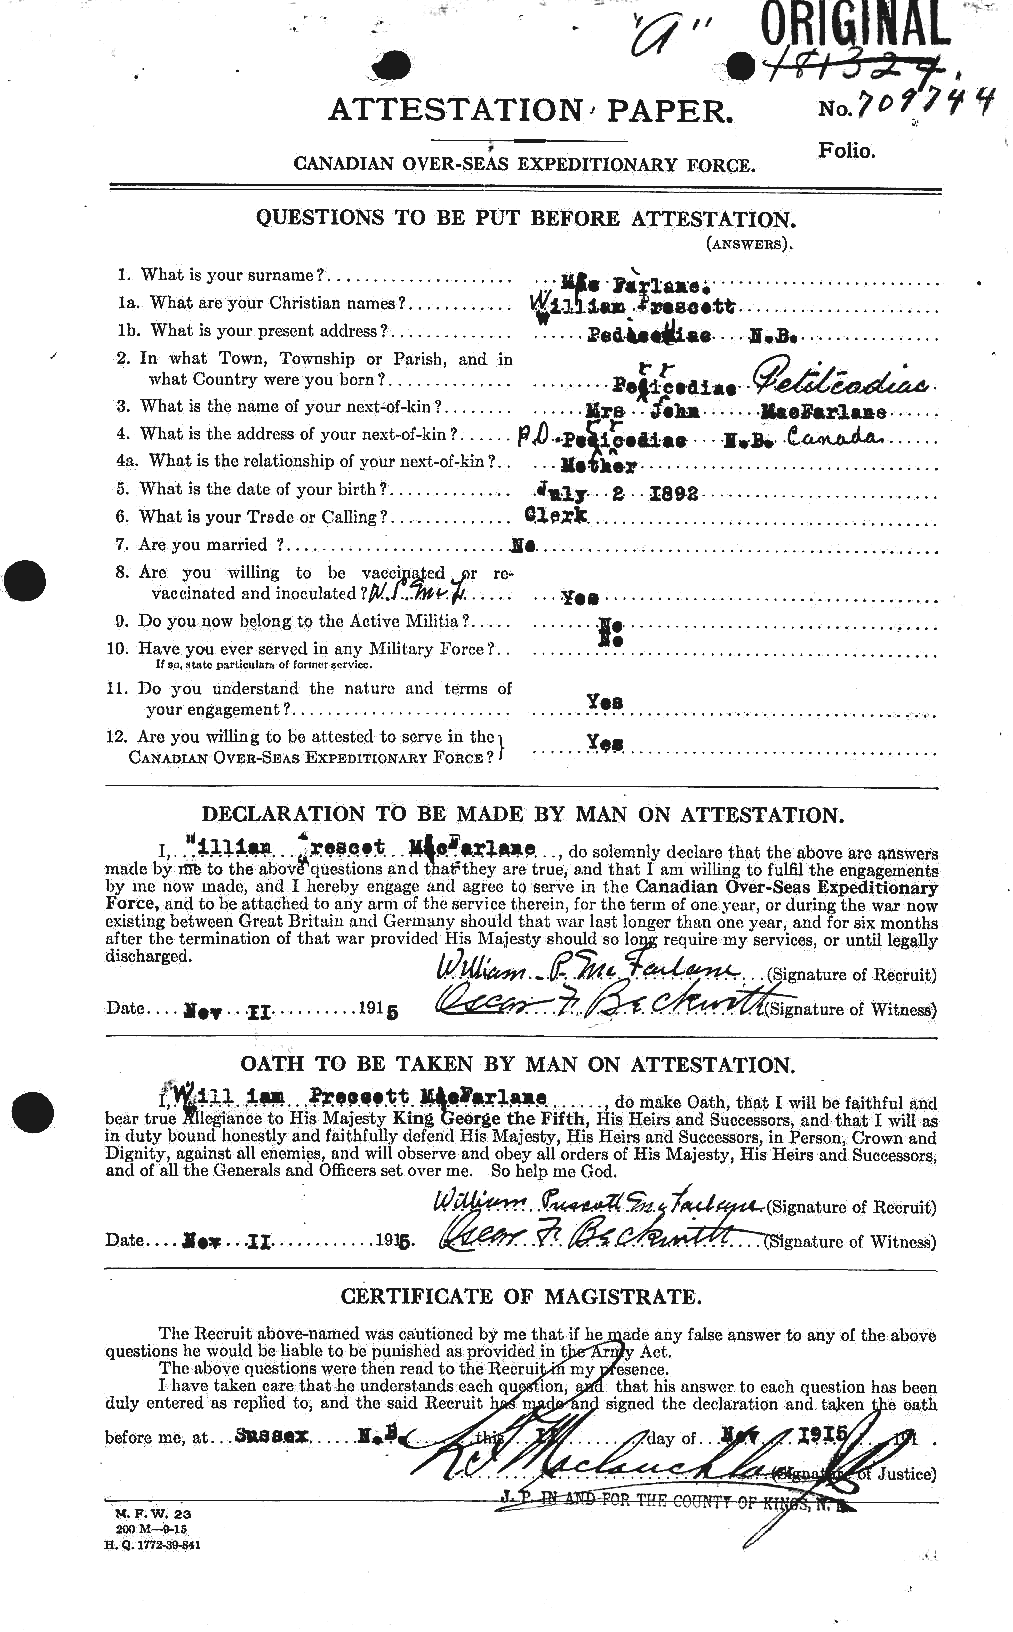 Personnel Records of the First World War - CEF 522837a